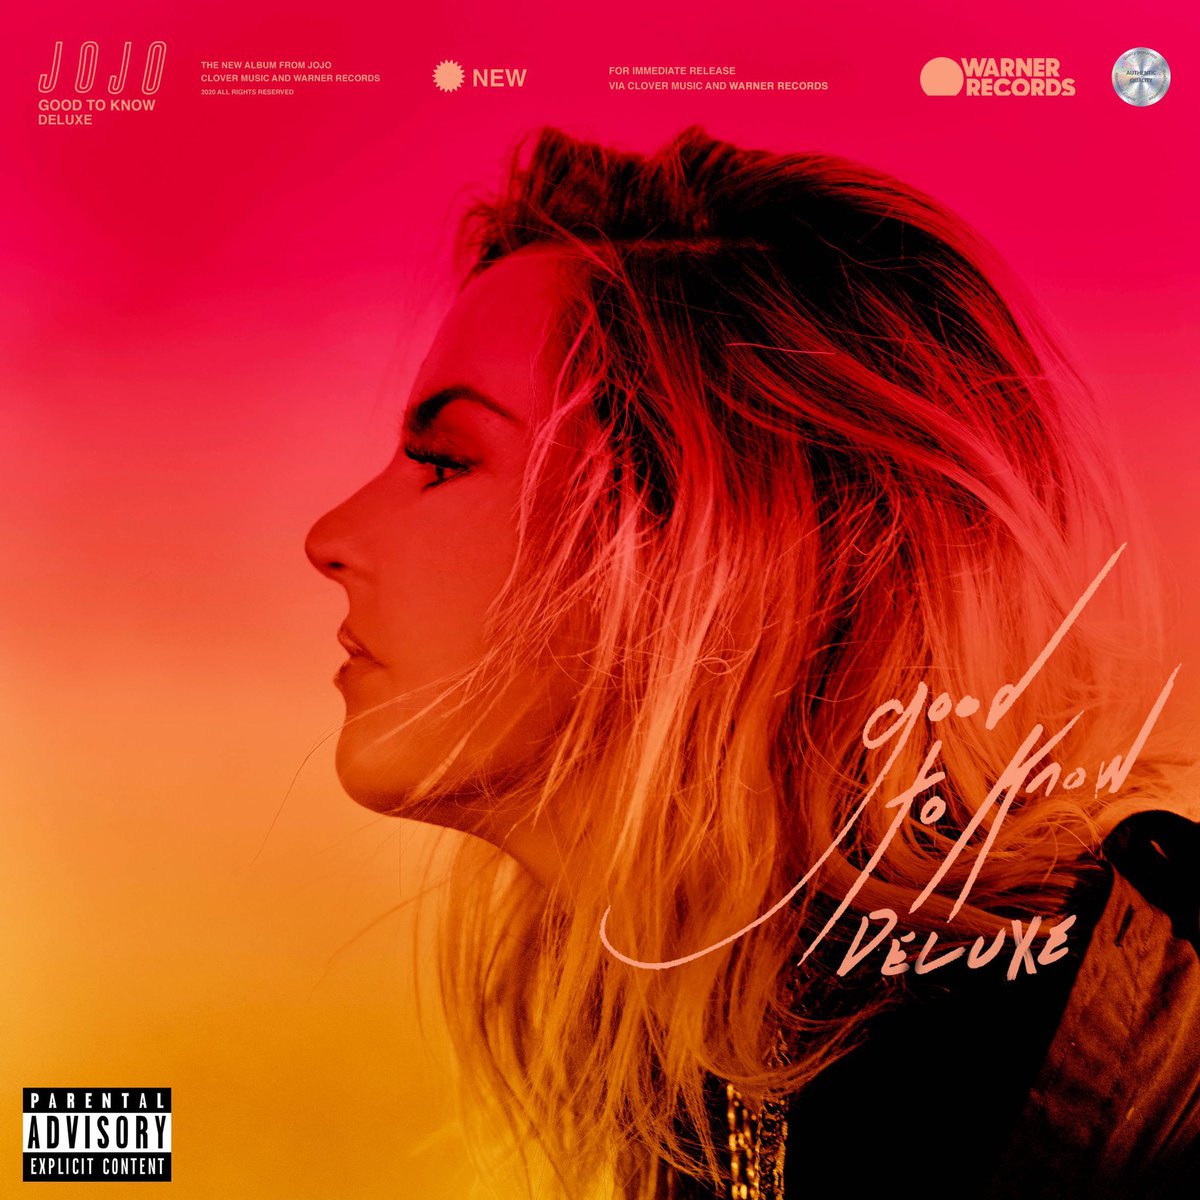 Download Music News Rumors On Twitter Jojo Iamjojo Will Release The Deluxe Edition Of Her Latest Album Good To Know On Friday August 28 She Has Also Revealed The Tracklist Featuring New